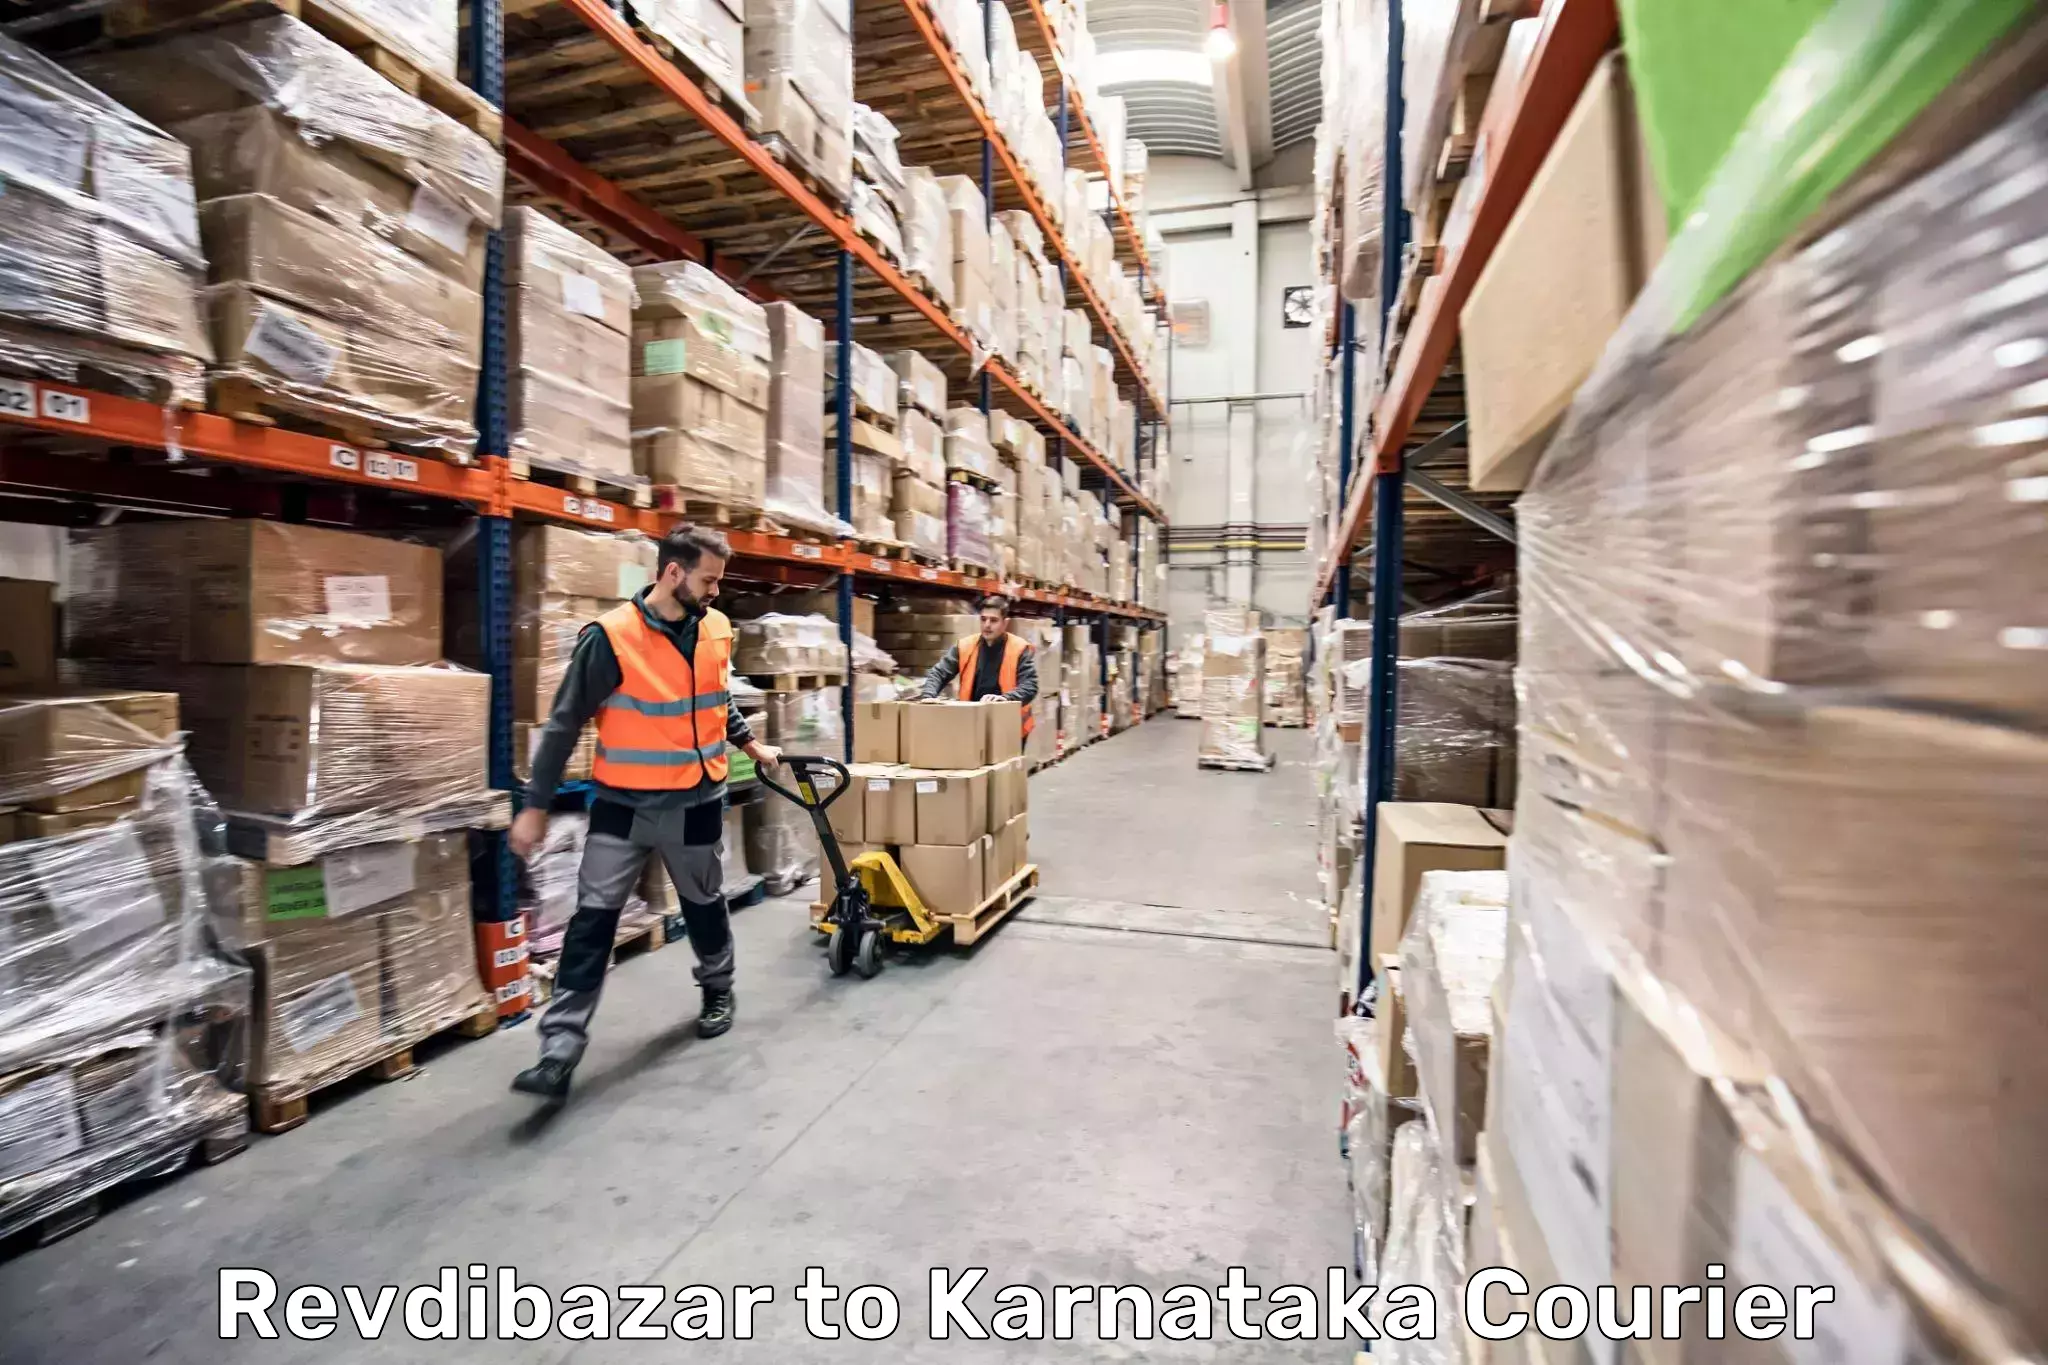 Luggage transport consulting Revdibazar to Mangalore Port